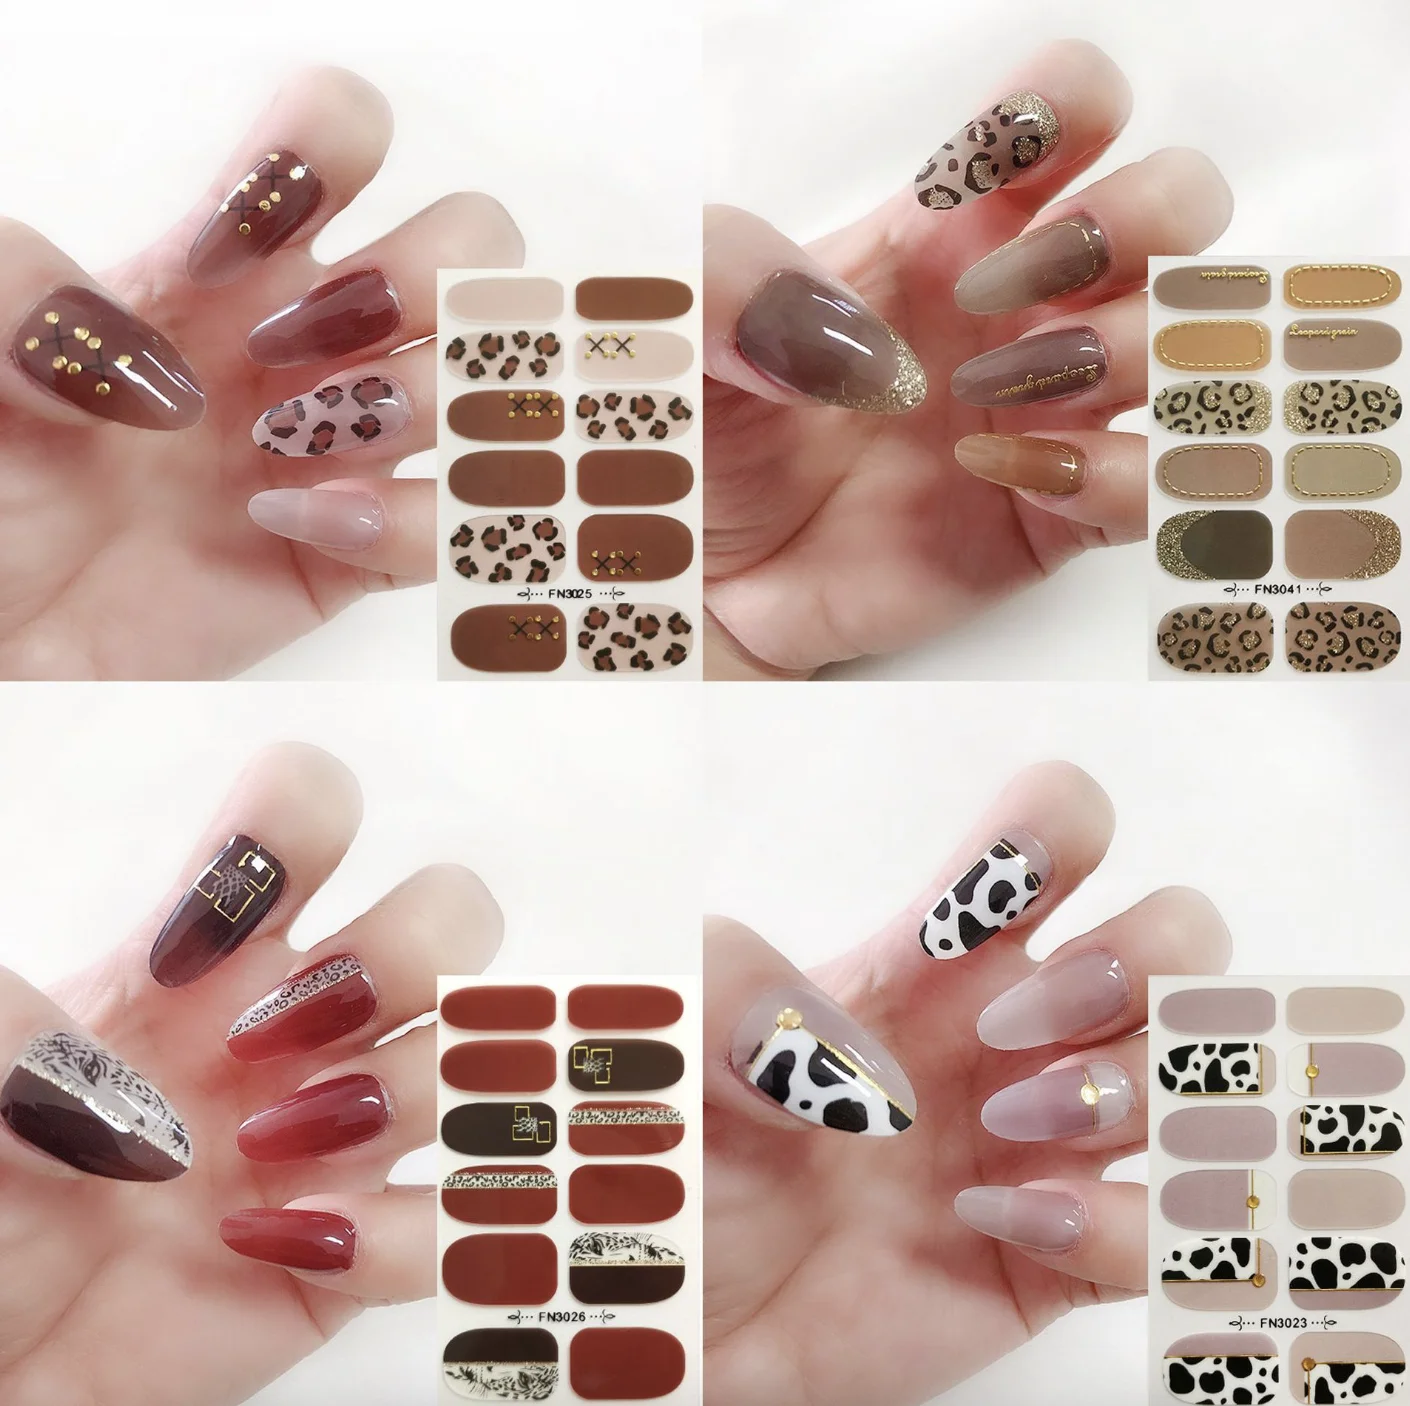 3D Leopard press On Nails Stickers for Nails Nails Parts Nail Art Decorations Manicure Nails Art Full Cover Adhesive Sticker Set